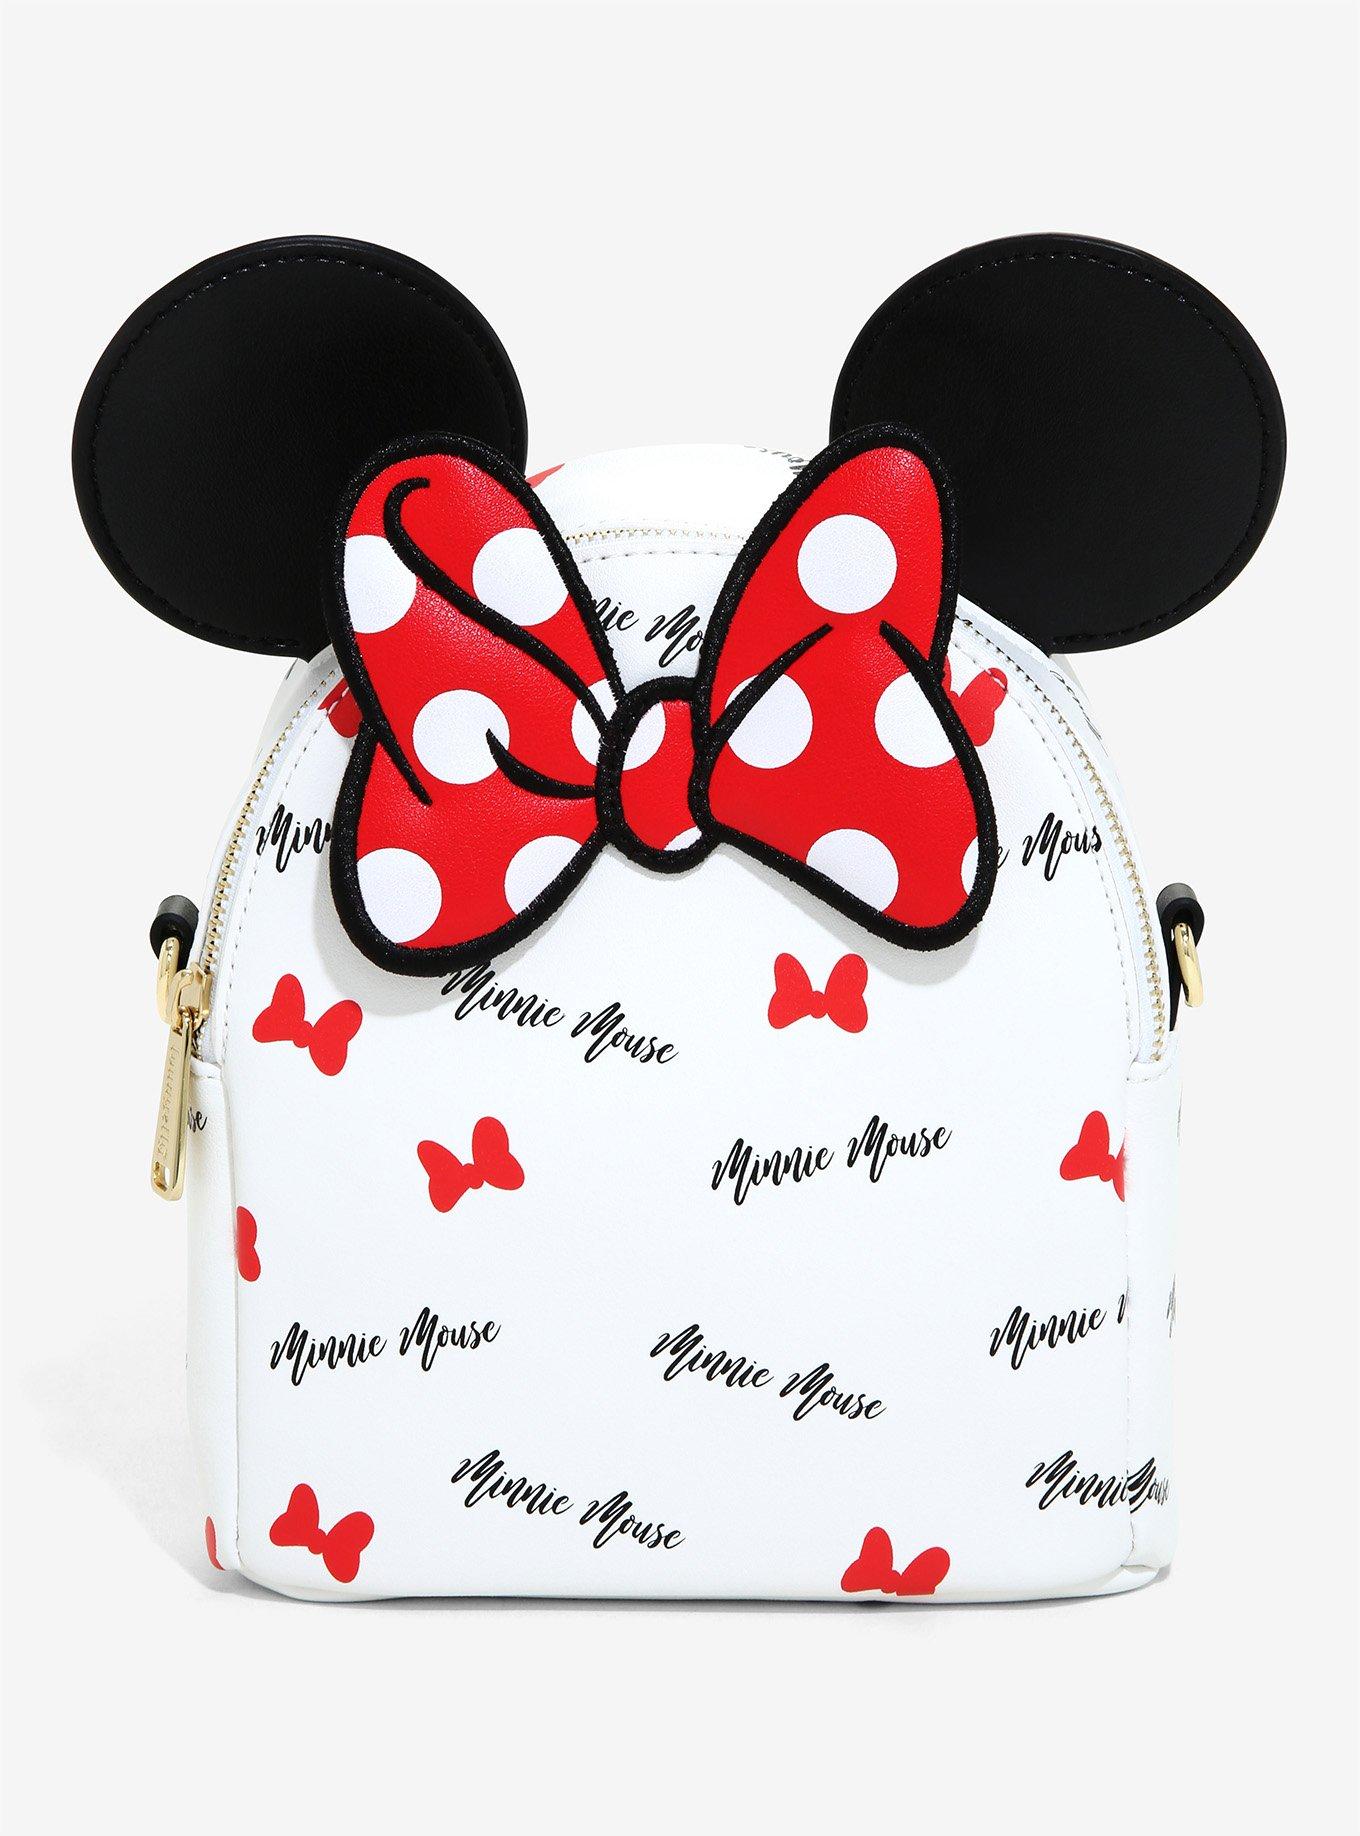 Loungefly Disney Minnie Mouse Denim Patch Backpack - BoxLunch Exclusive